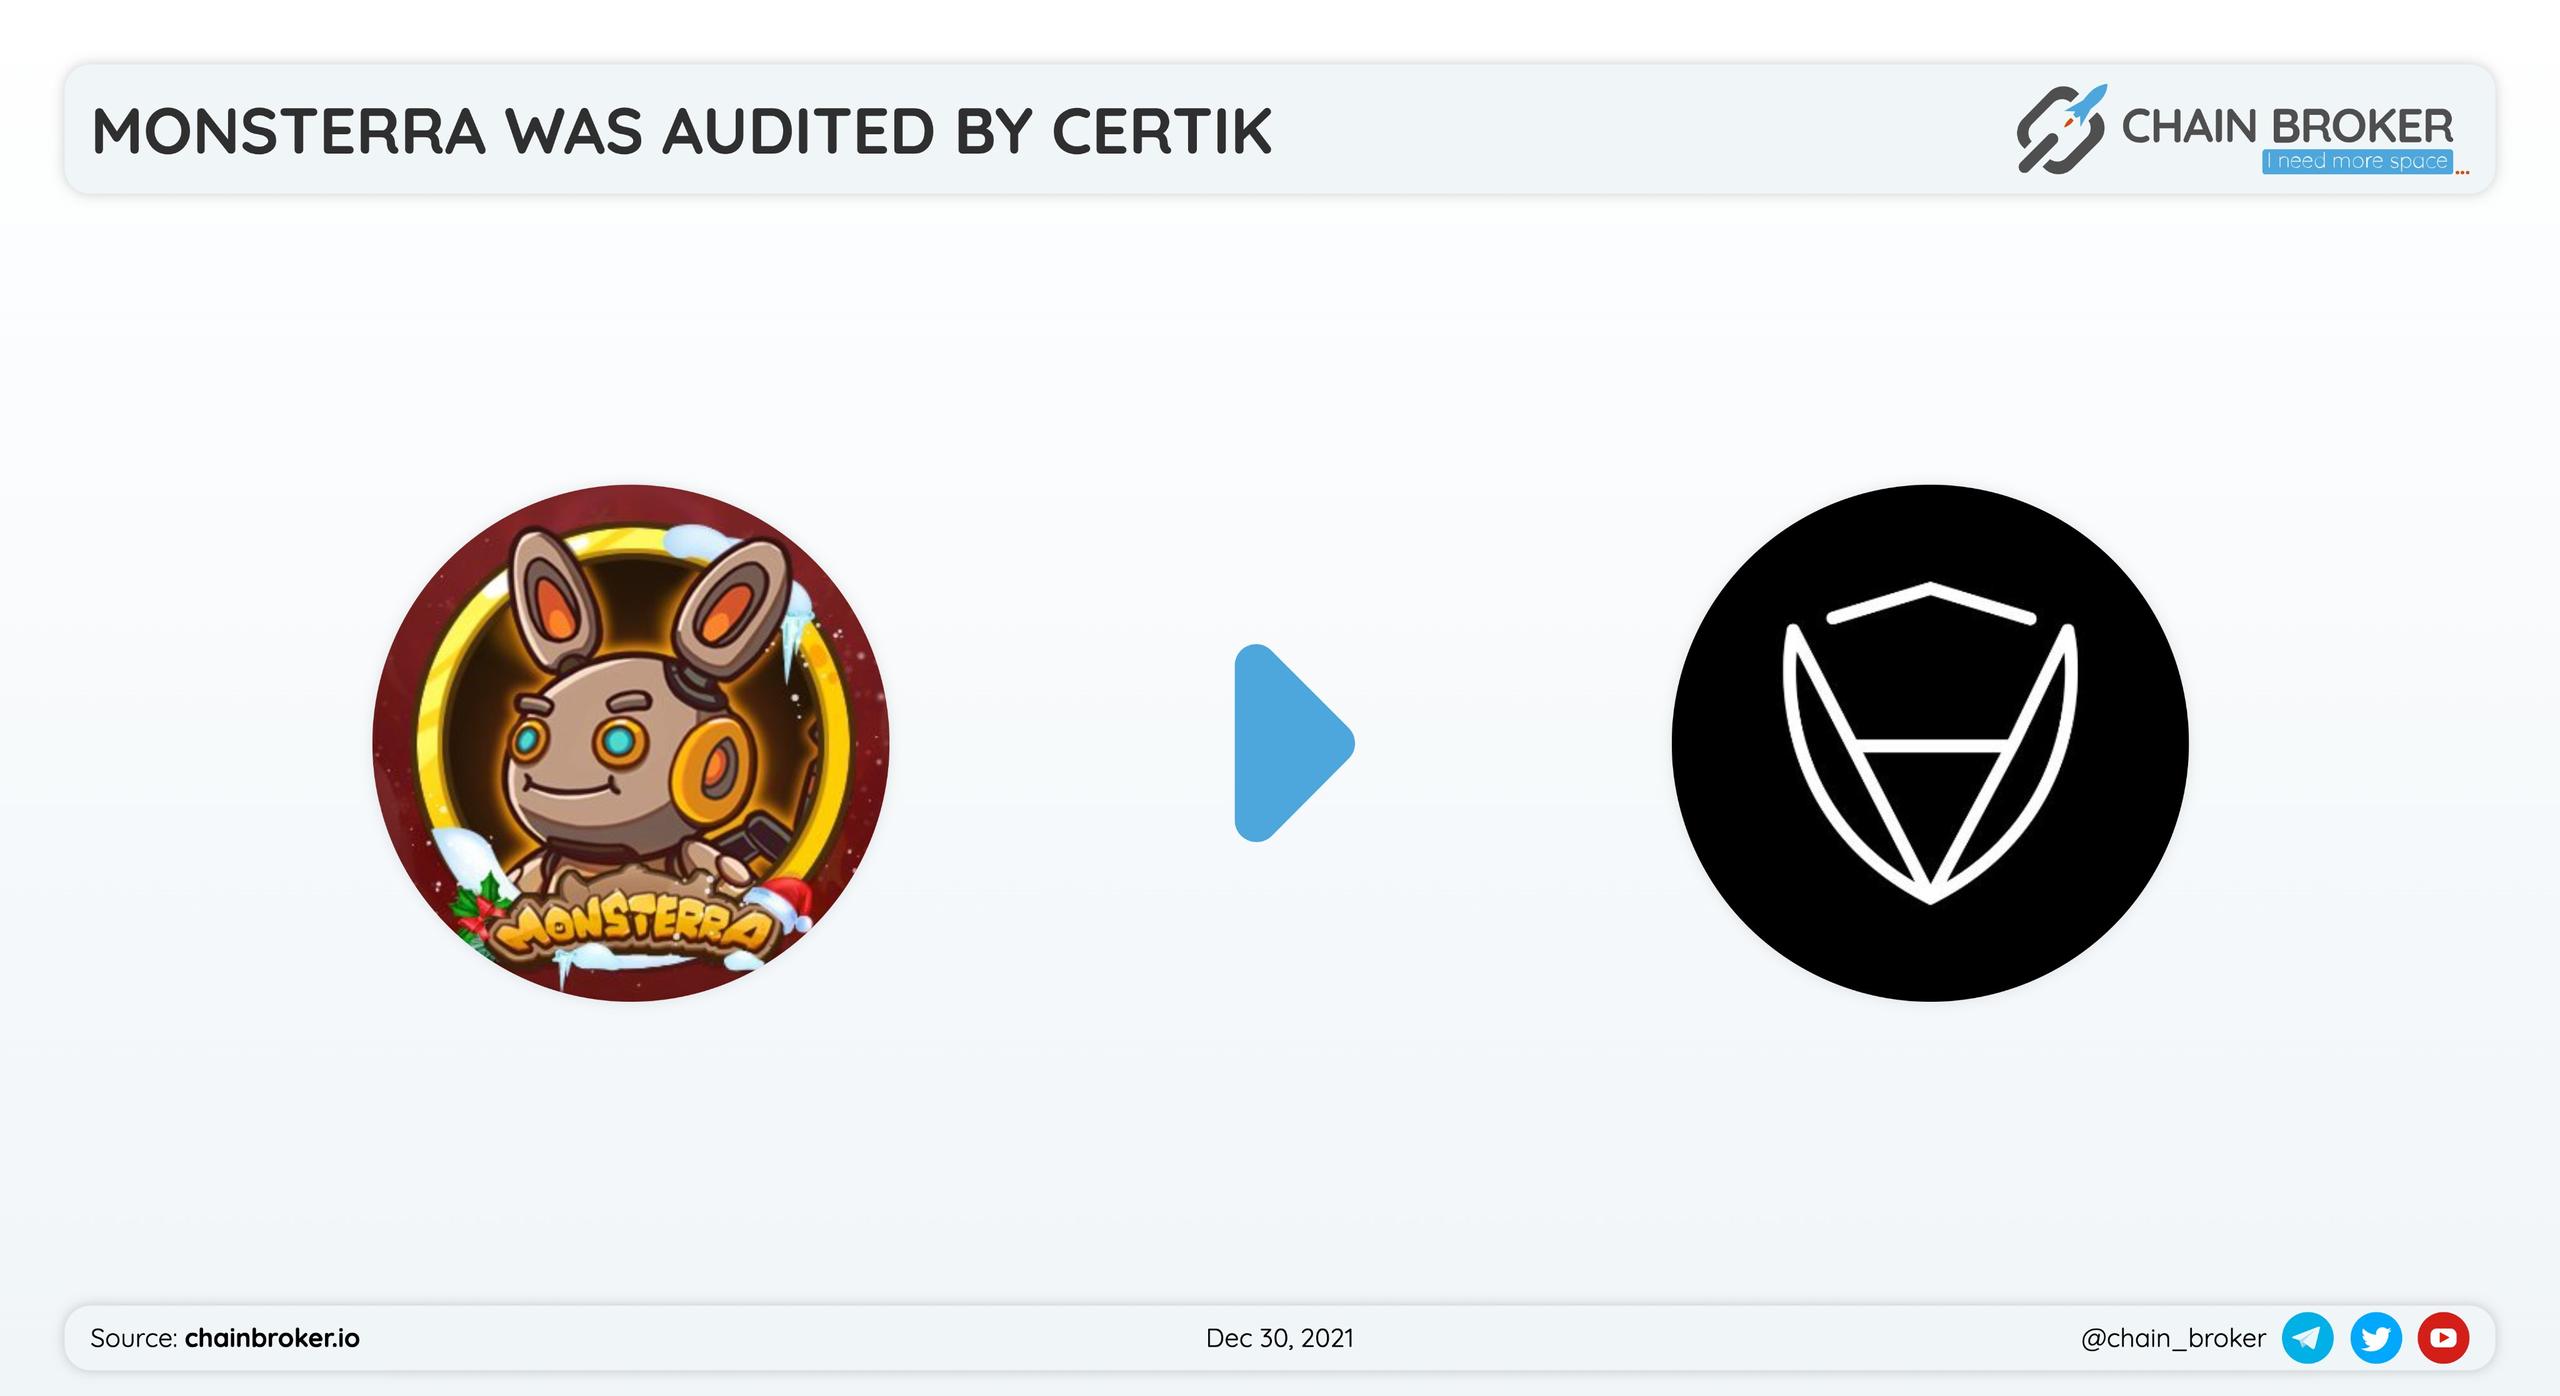 Monsterra has partnered with Сertik for smart contract security audition.